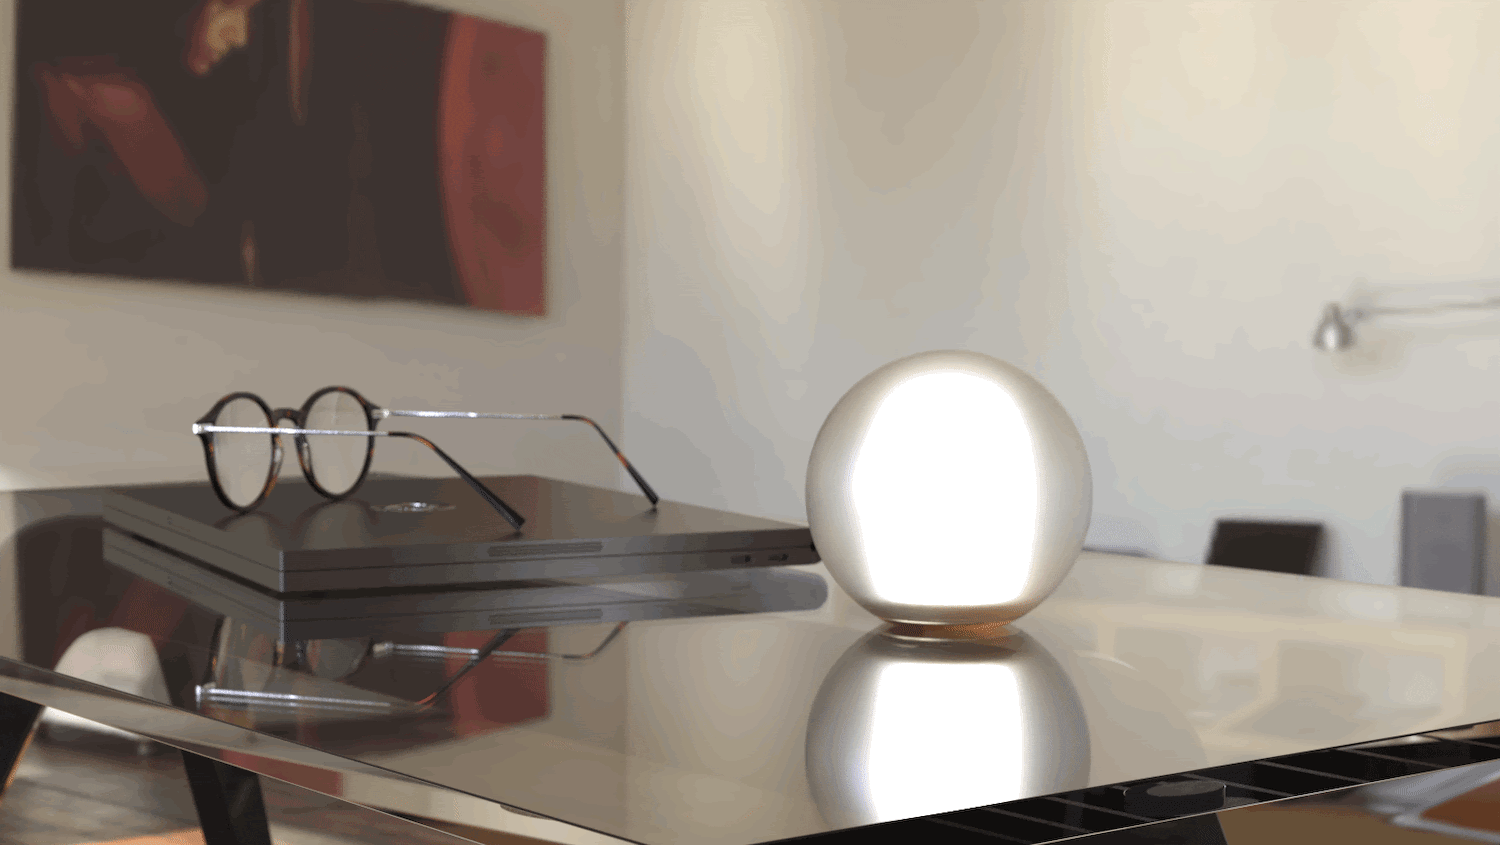 This image shows the sphere-like light turning on and off on a table. The top of the sphere is frosted glass with the bottom part being gold. There is also a laptop and a set of glasses on the glass table.